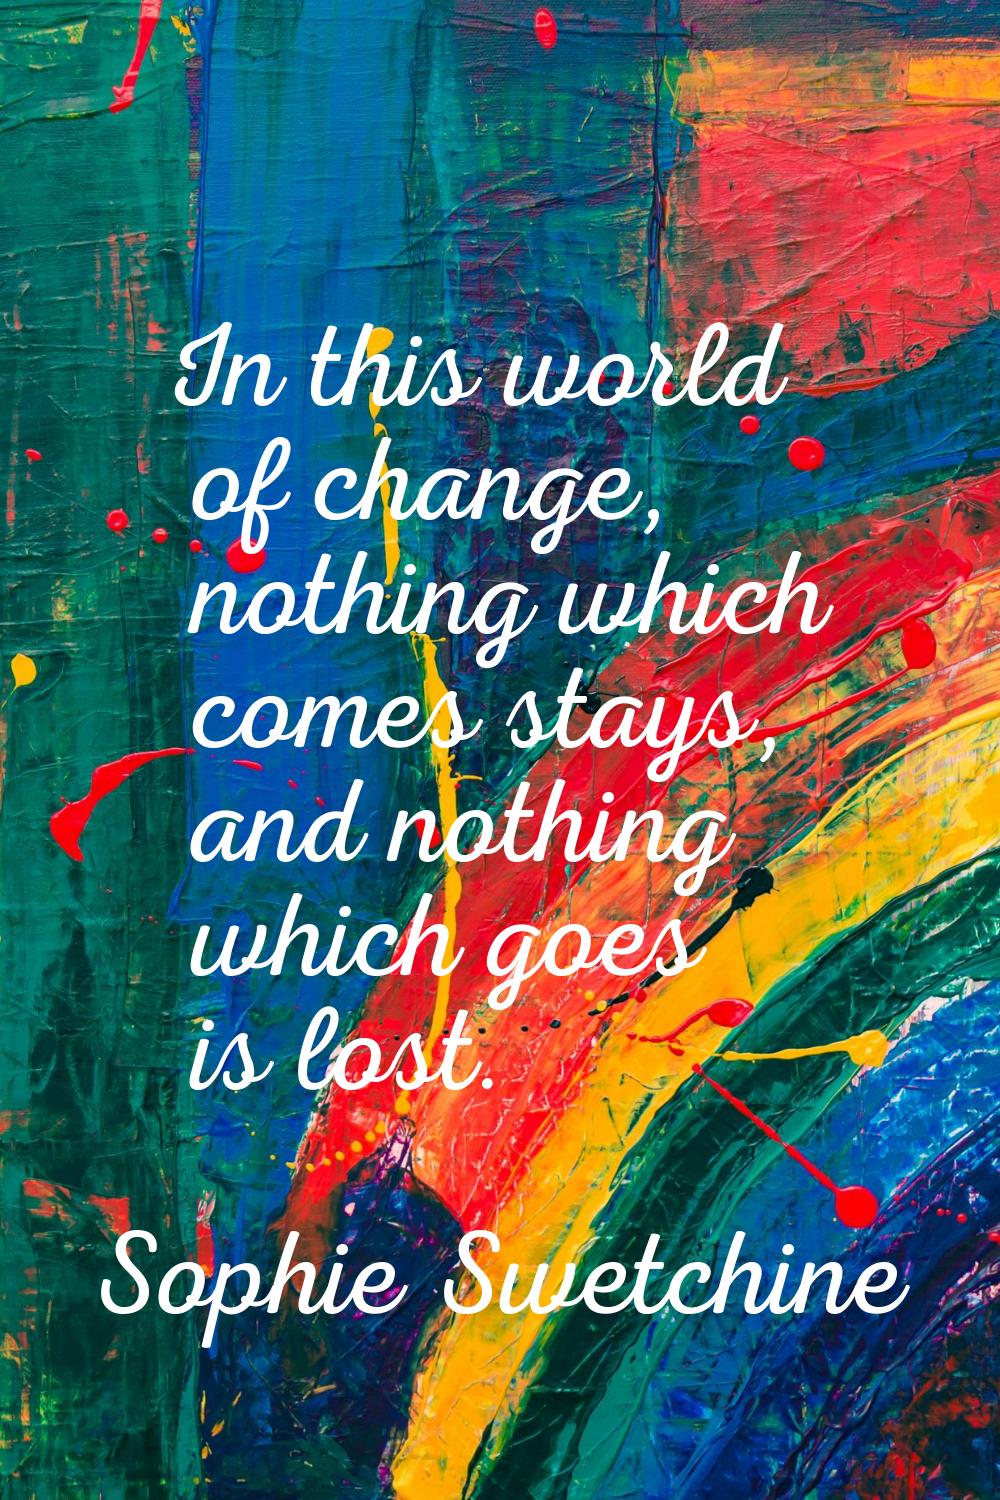 In this world of change, nothing which comes stays, and nothing which goes is lost.